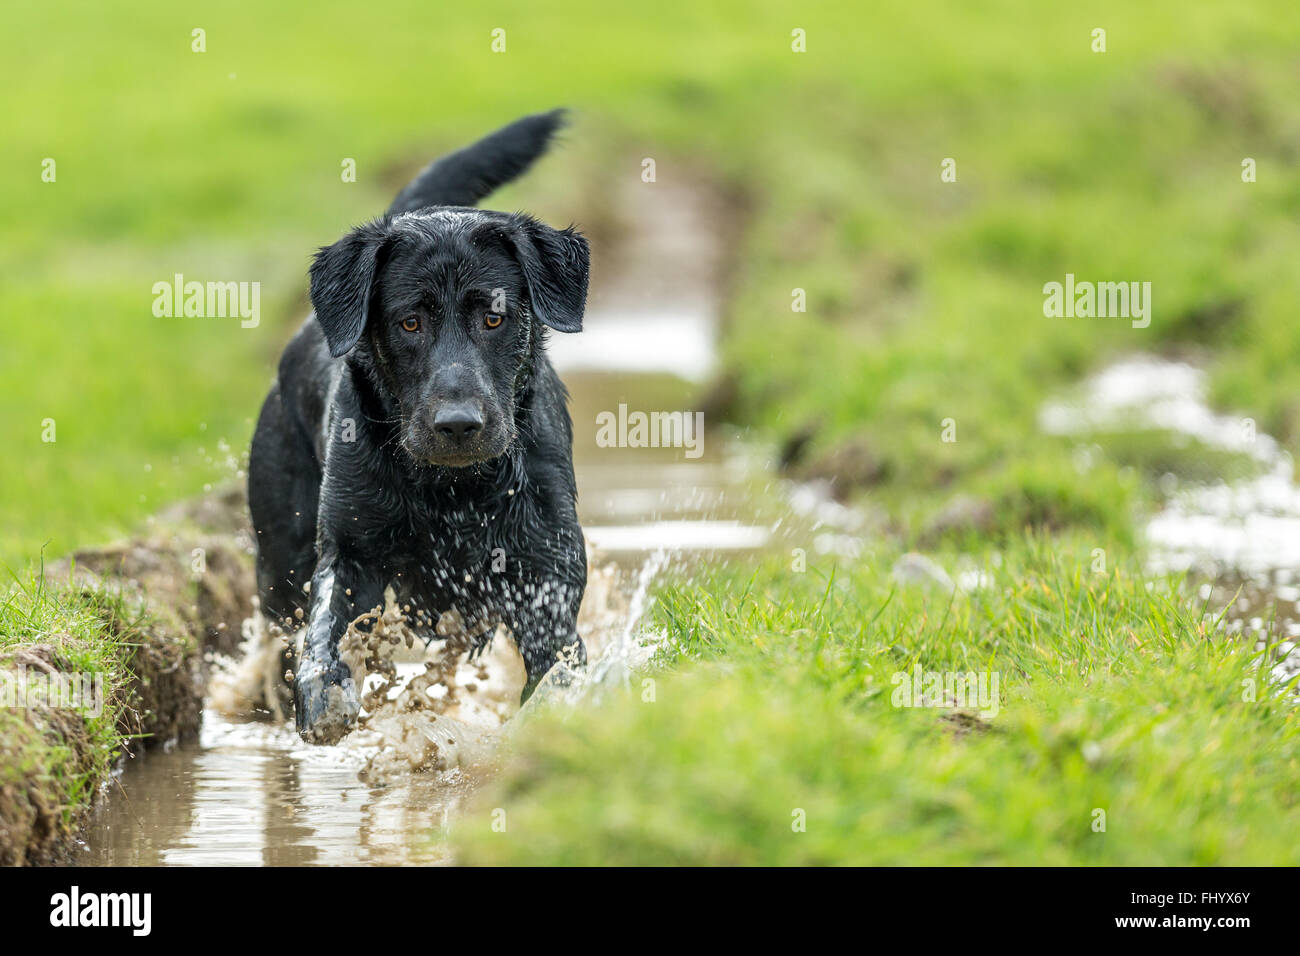 Black Labrador dog in a muddy puddle Stock Photo